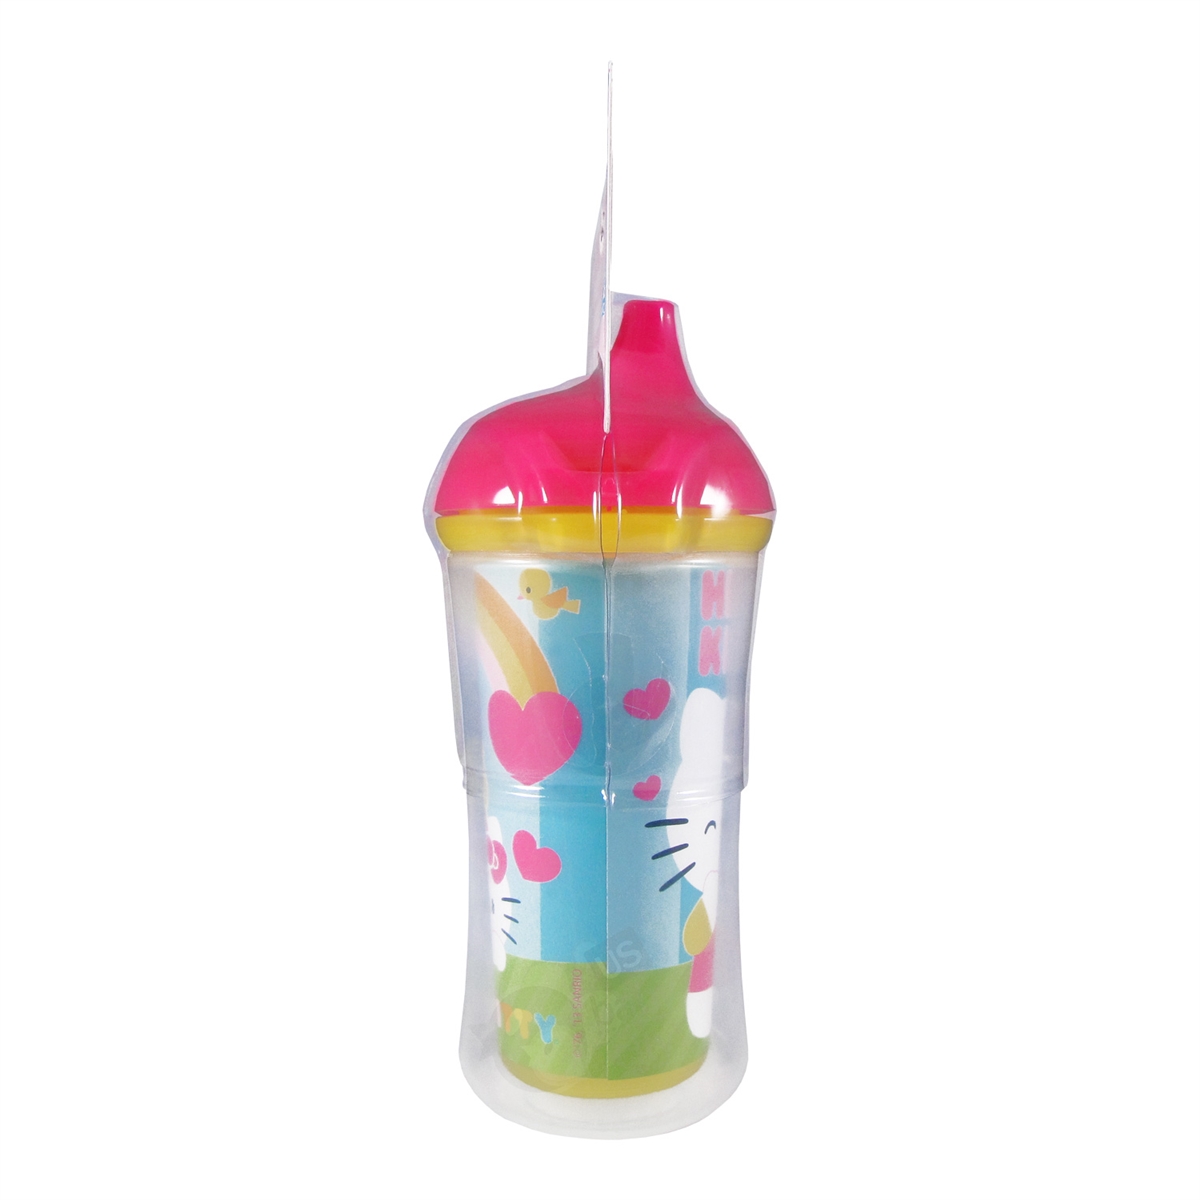 Munchkin Sippy Cups, 9+ Months, 9 Ounce - 2 cups